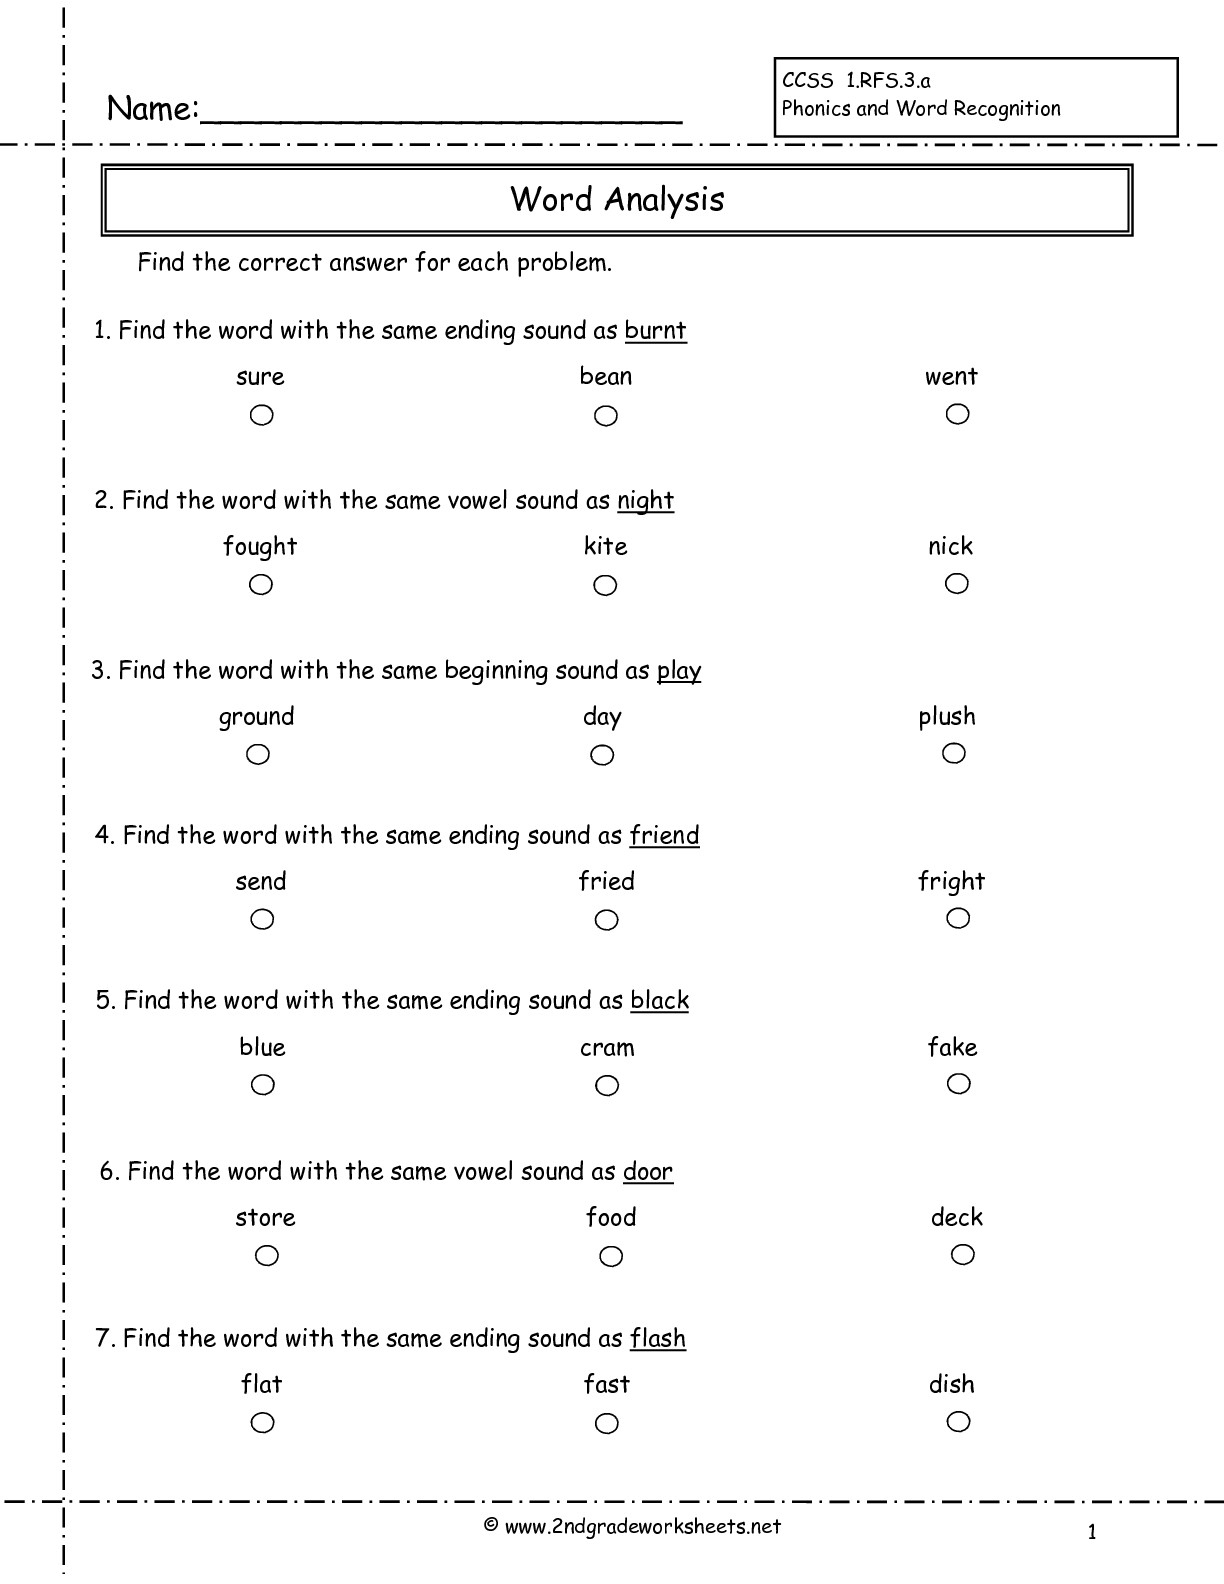 Second Grade Phonics Worksheets And Flashcards - Free Printable | Free Printable Phonics Worksheets For Second Grade